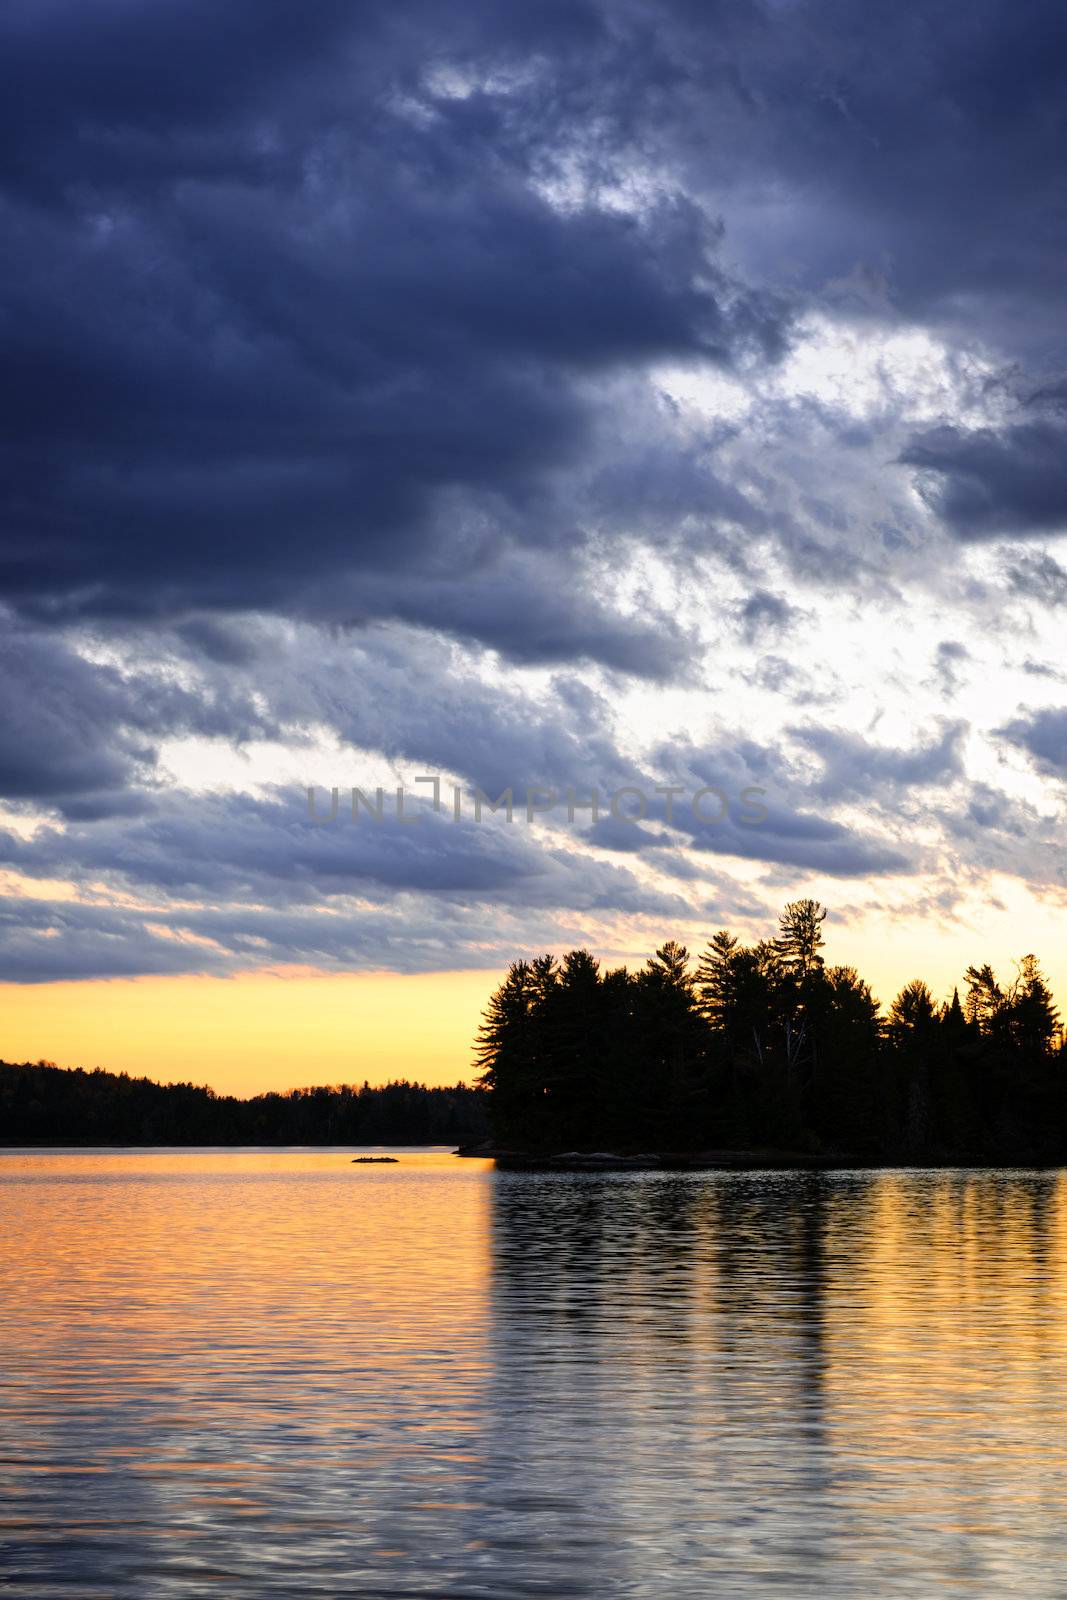 Dramatic sunset at Lake of Two Rivers in Algonquin Park, Ontario, Canada